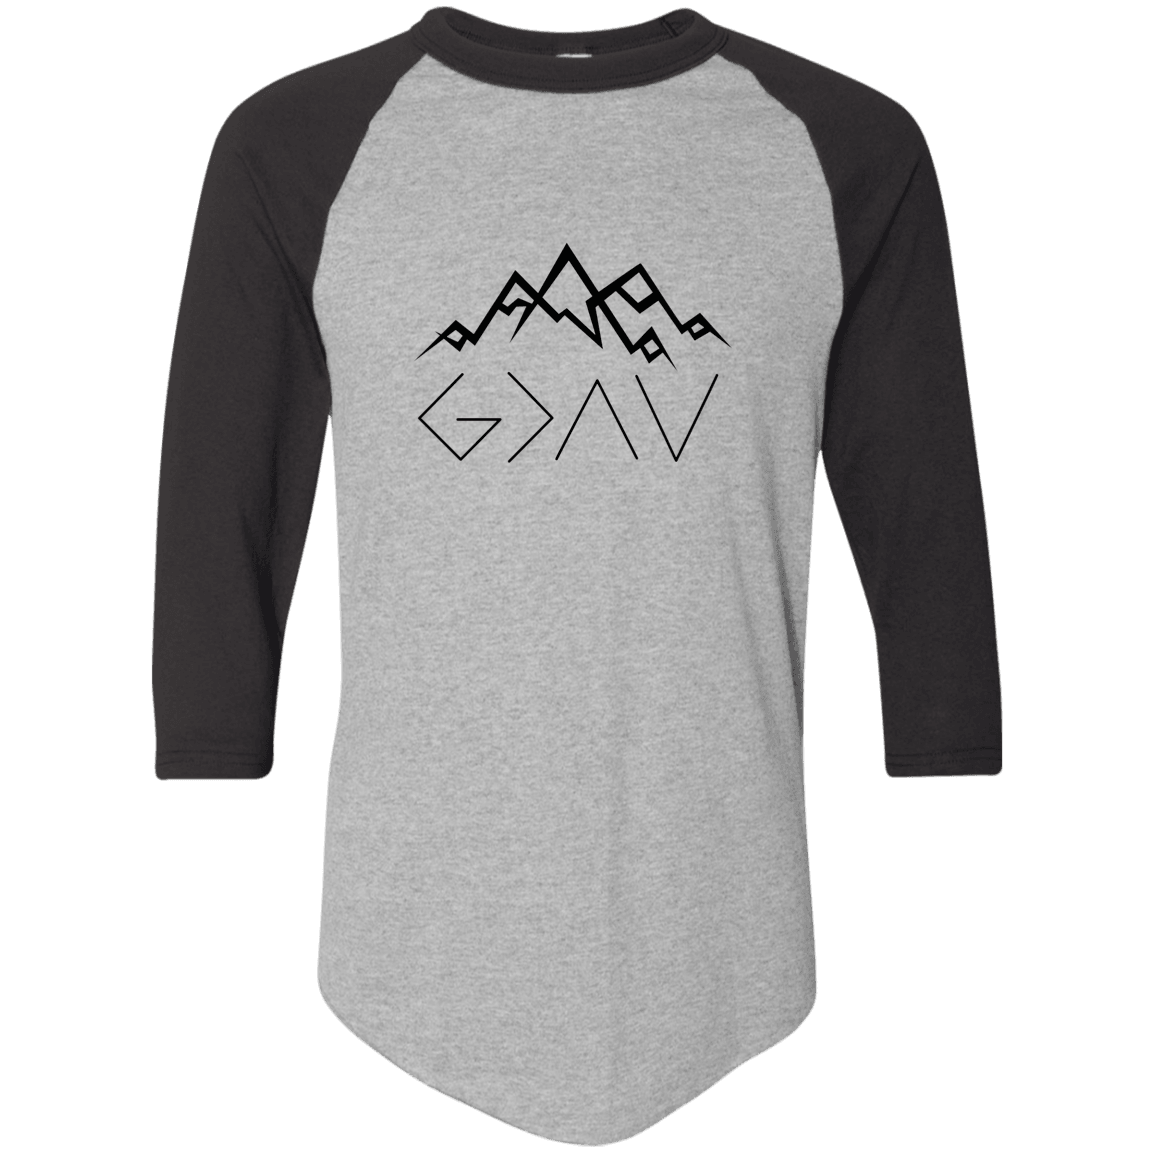 Designs by MyUtopia Shout Out:God is Greater than My Highs and Lows John 16:33 3/4 Length Sleeve Color block Raglan Jersey T-Shirt,Athletic Heather/Black / S,Adult Unisex T-Shirt